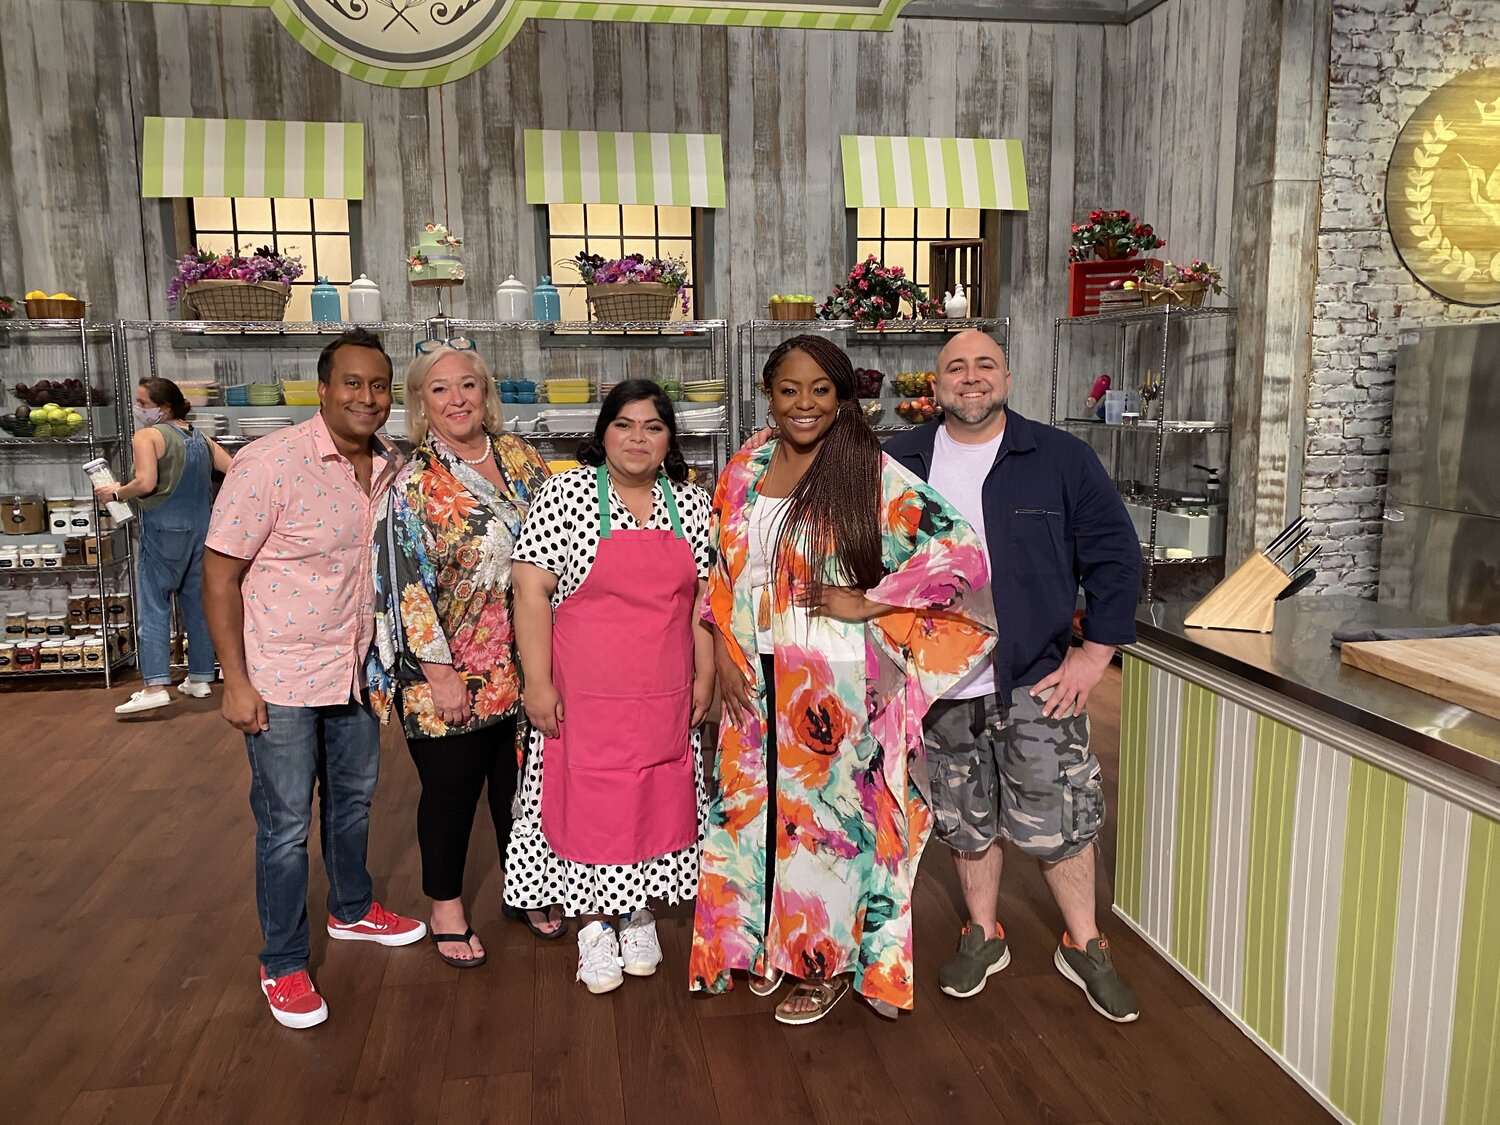 The winner and cast of Spring Baking Championship, Season 7